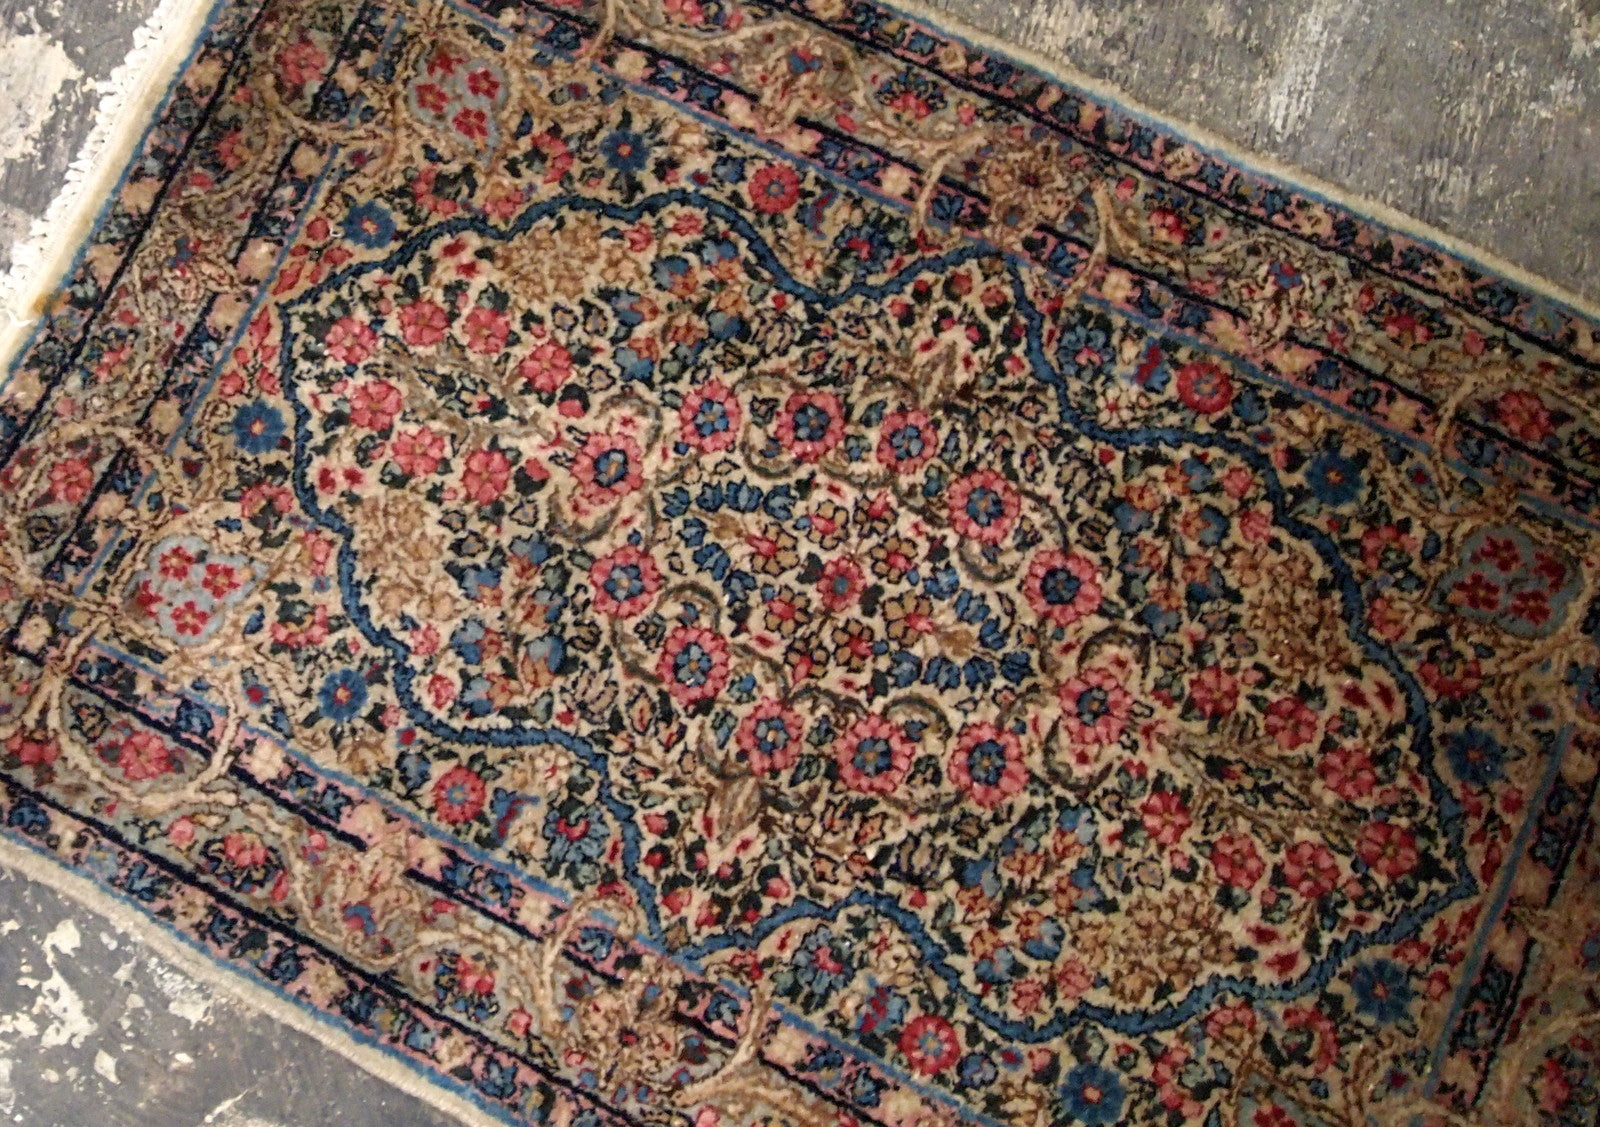 Antique Persian Kerman floral rug in colorful shades. The rug is from the beginning of 20th century in original good condition.